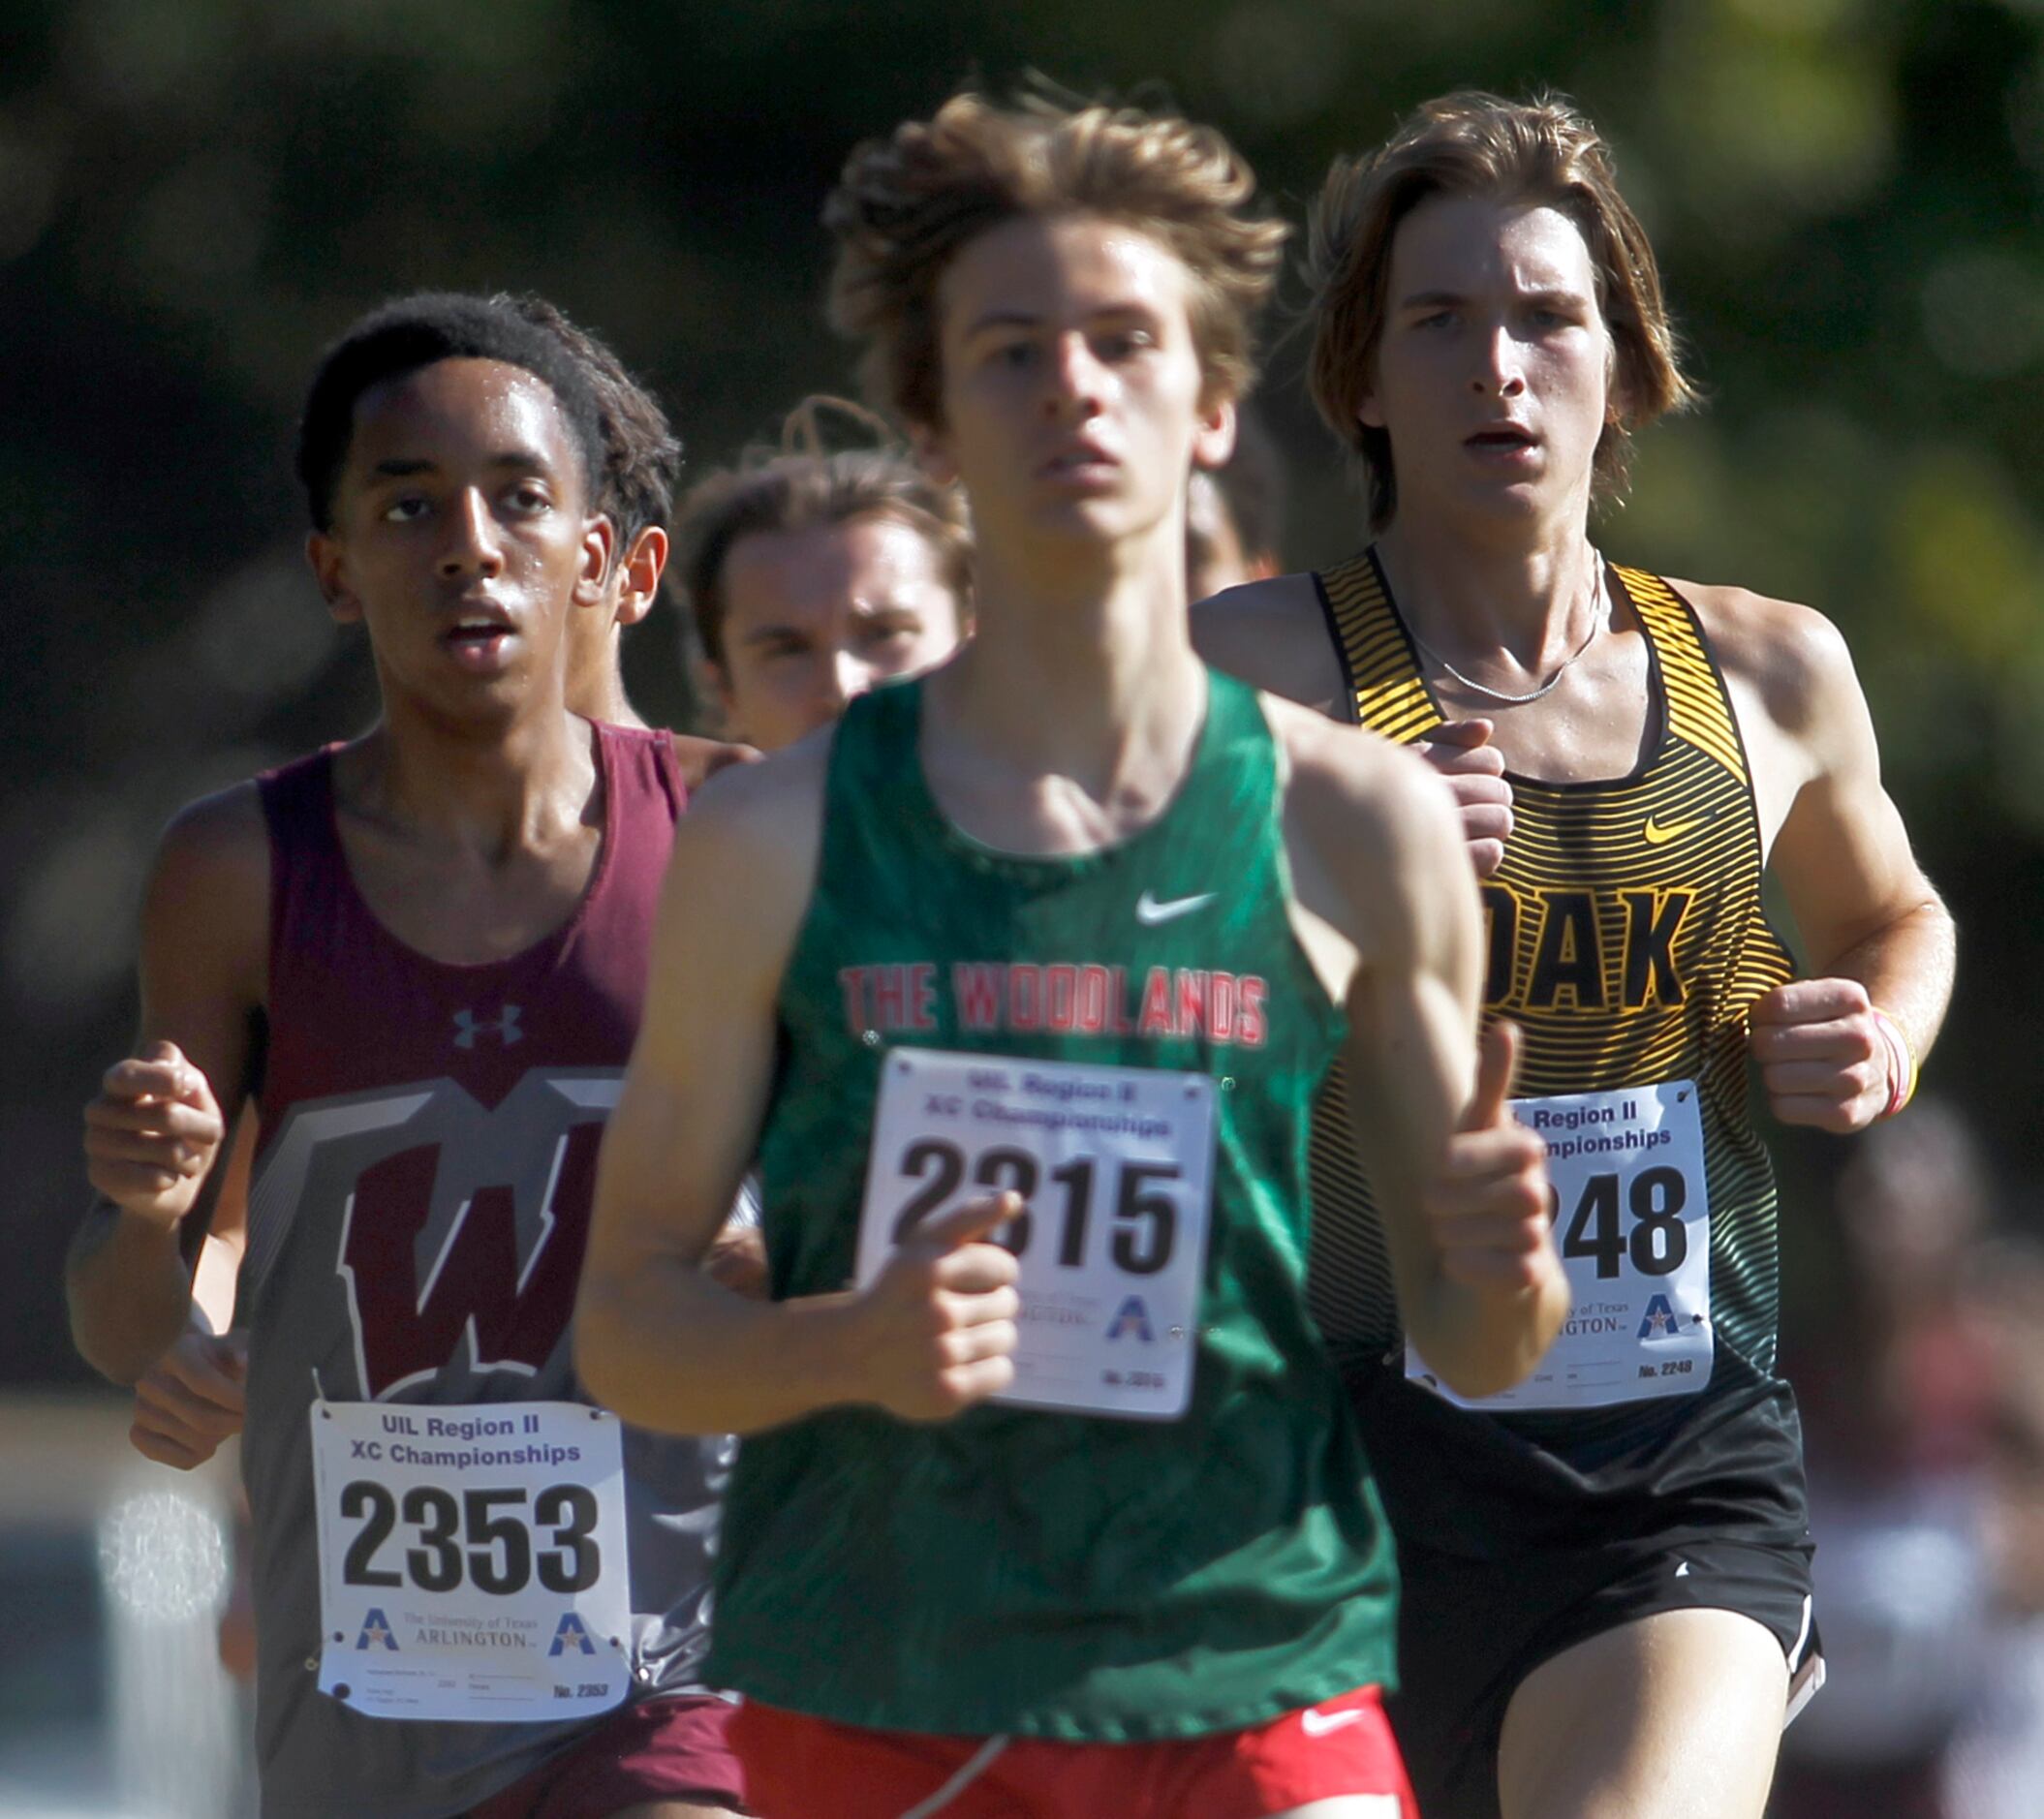 Wylie's Nathanael Berhane, (bib number 2353), left, finished in 2nd place with a time of...